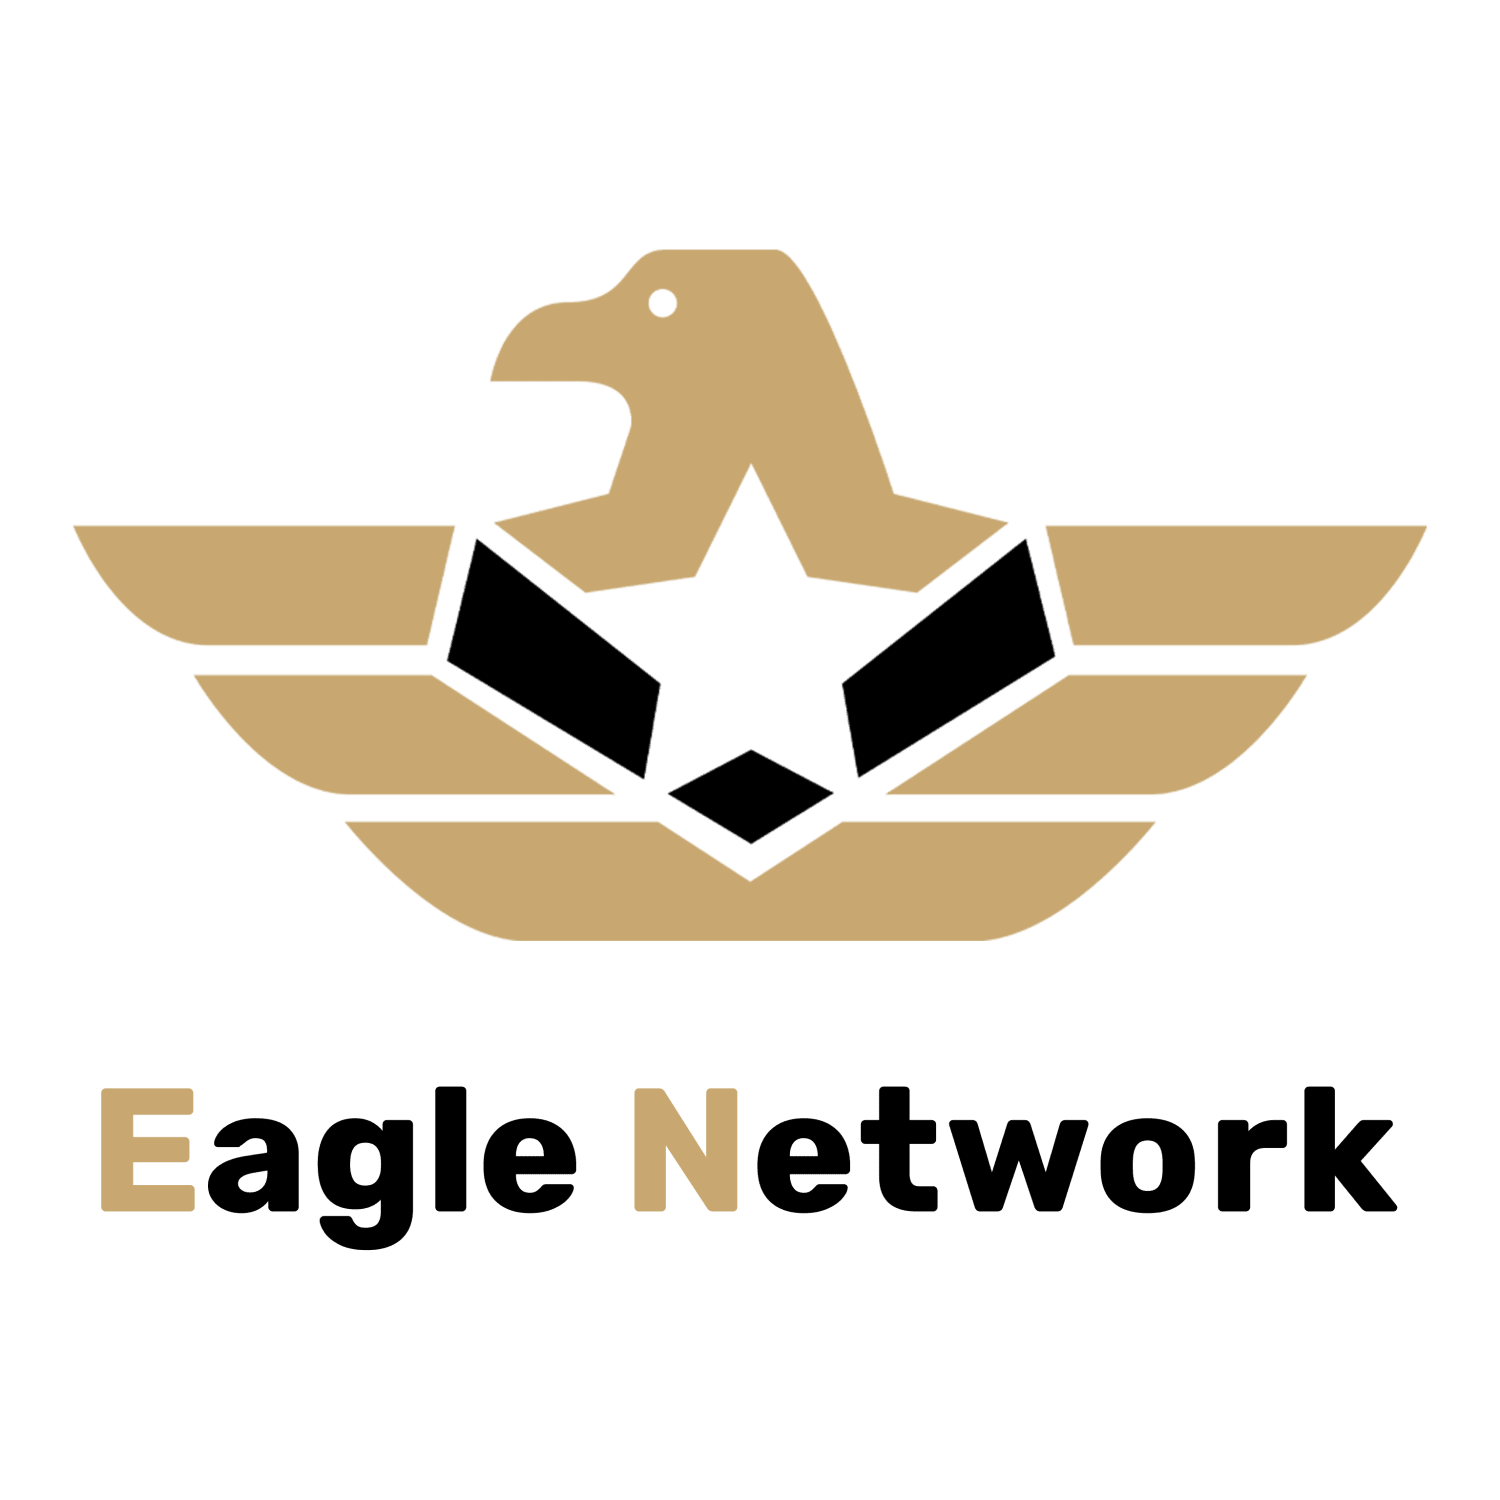 Eagle is a new and free digital currency you mine on your phone. Join as a pioneer and earn big!